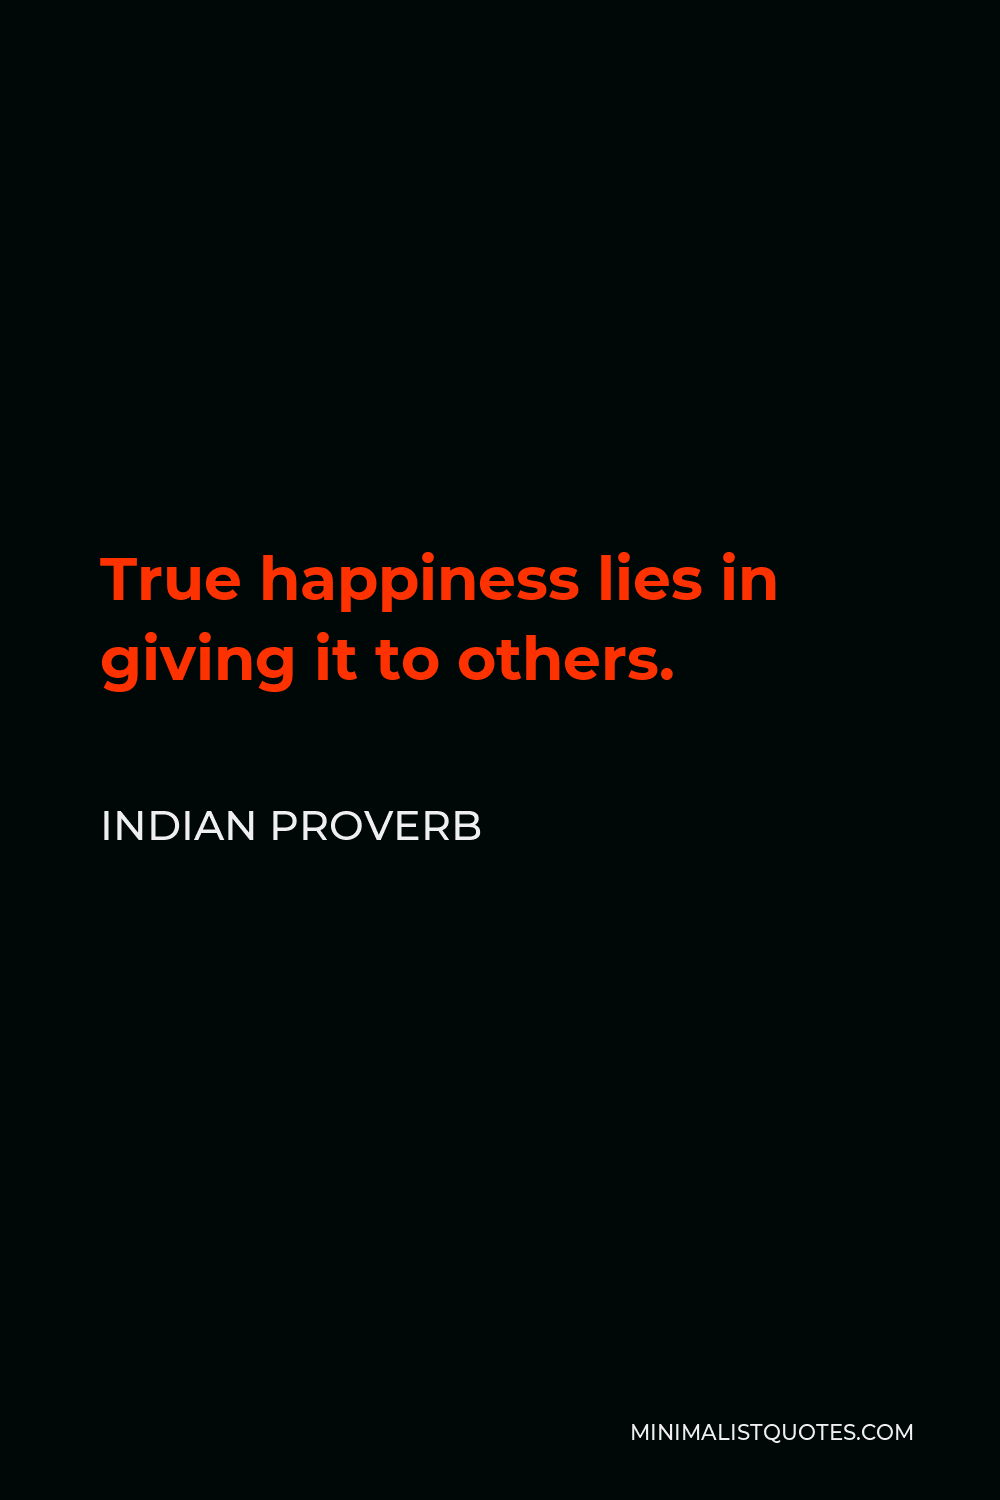 Indian Proverb Quote - True happiness lies in giving it to others.